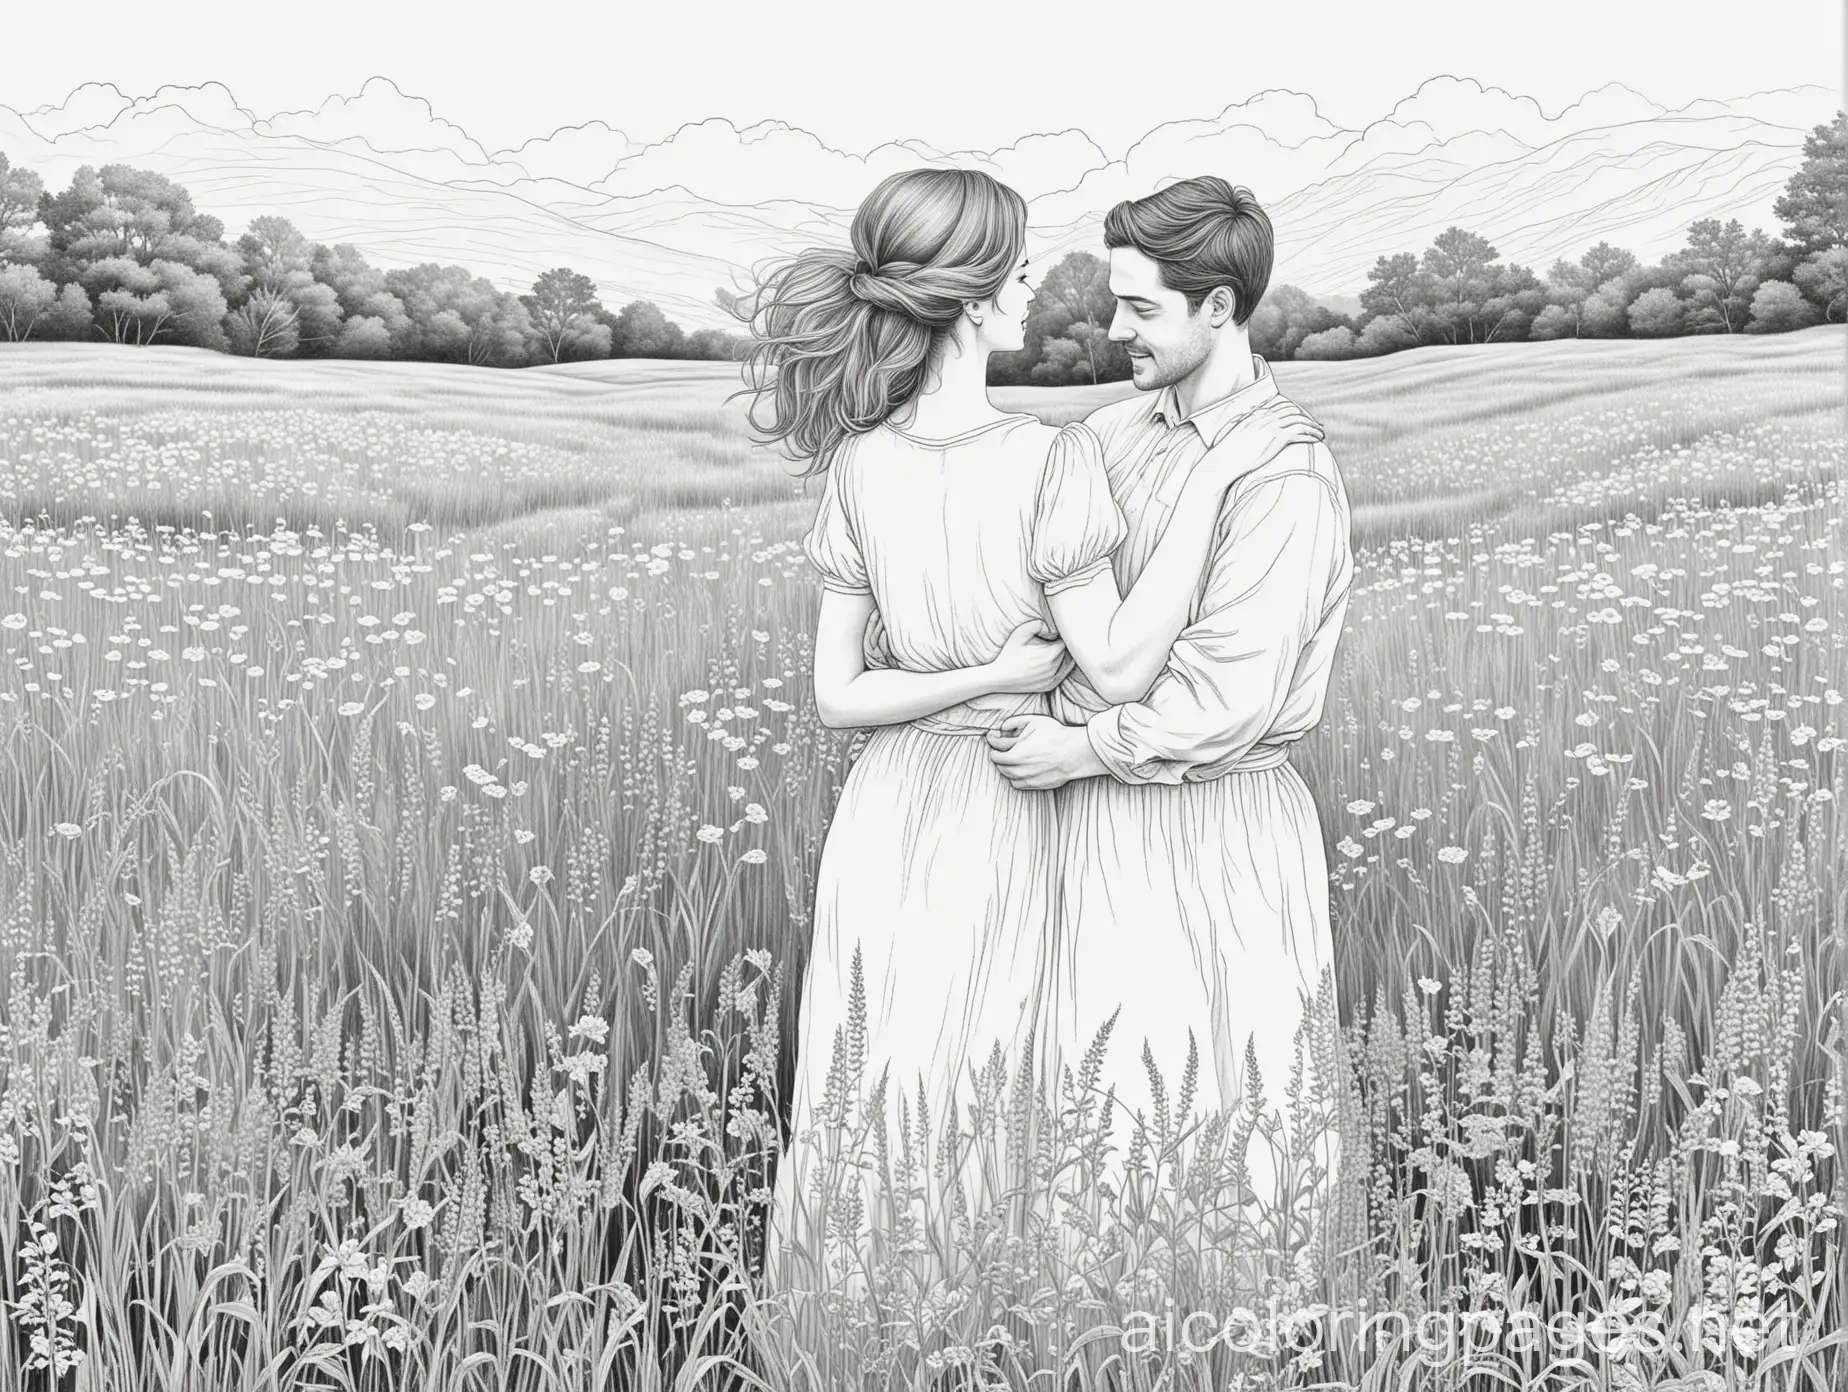 A couple, a man and a woman standing embraced in a field with grasses and flowers, Coloring Page, black and white, line art, white background, Simplicity, Ample White Space. The background of the coloring page is plain white to make it easy for young children to color within the lines. The outlines of all the subjects are easy to distinguish, making it simple for kids to color without too much difficulty